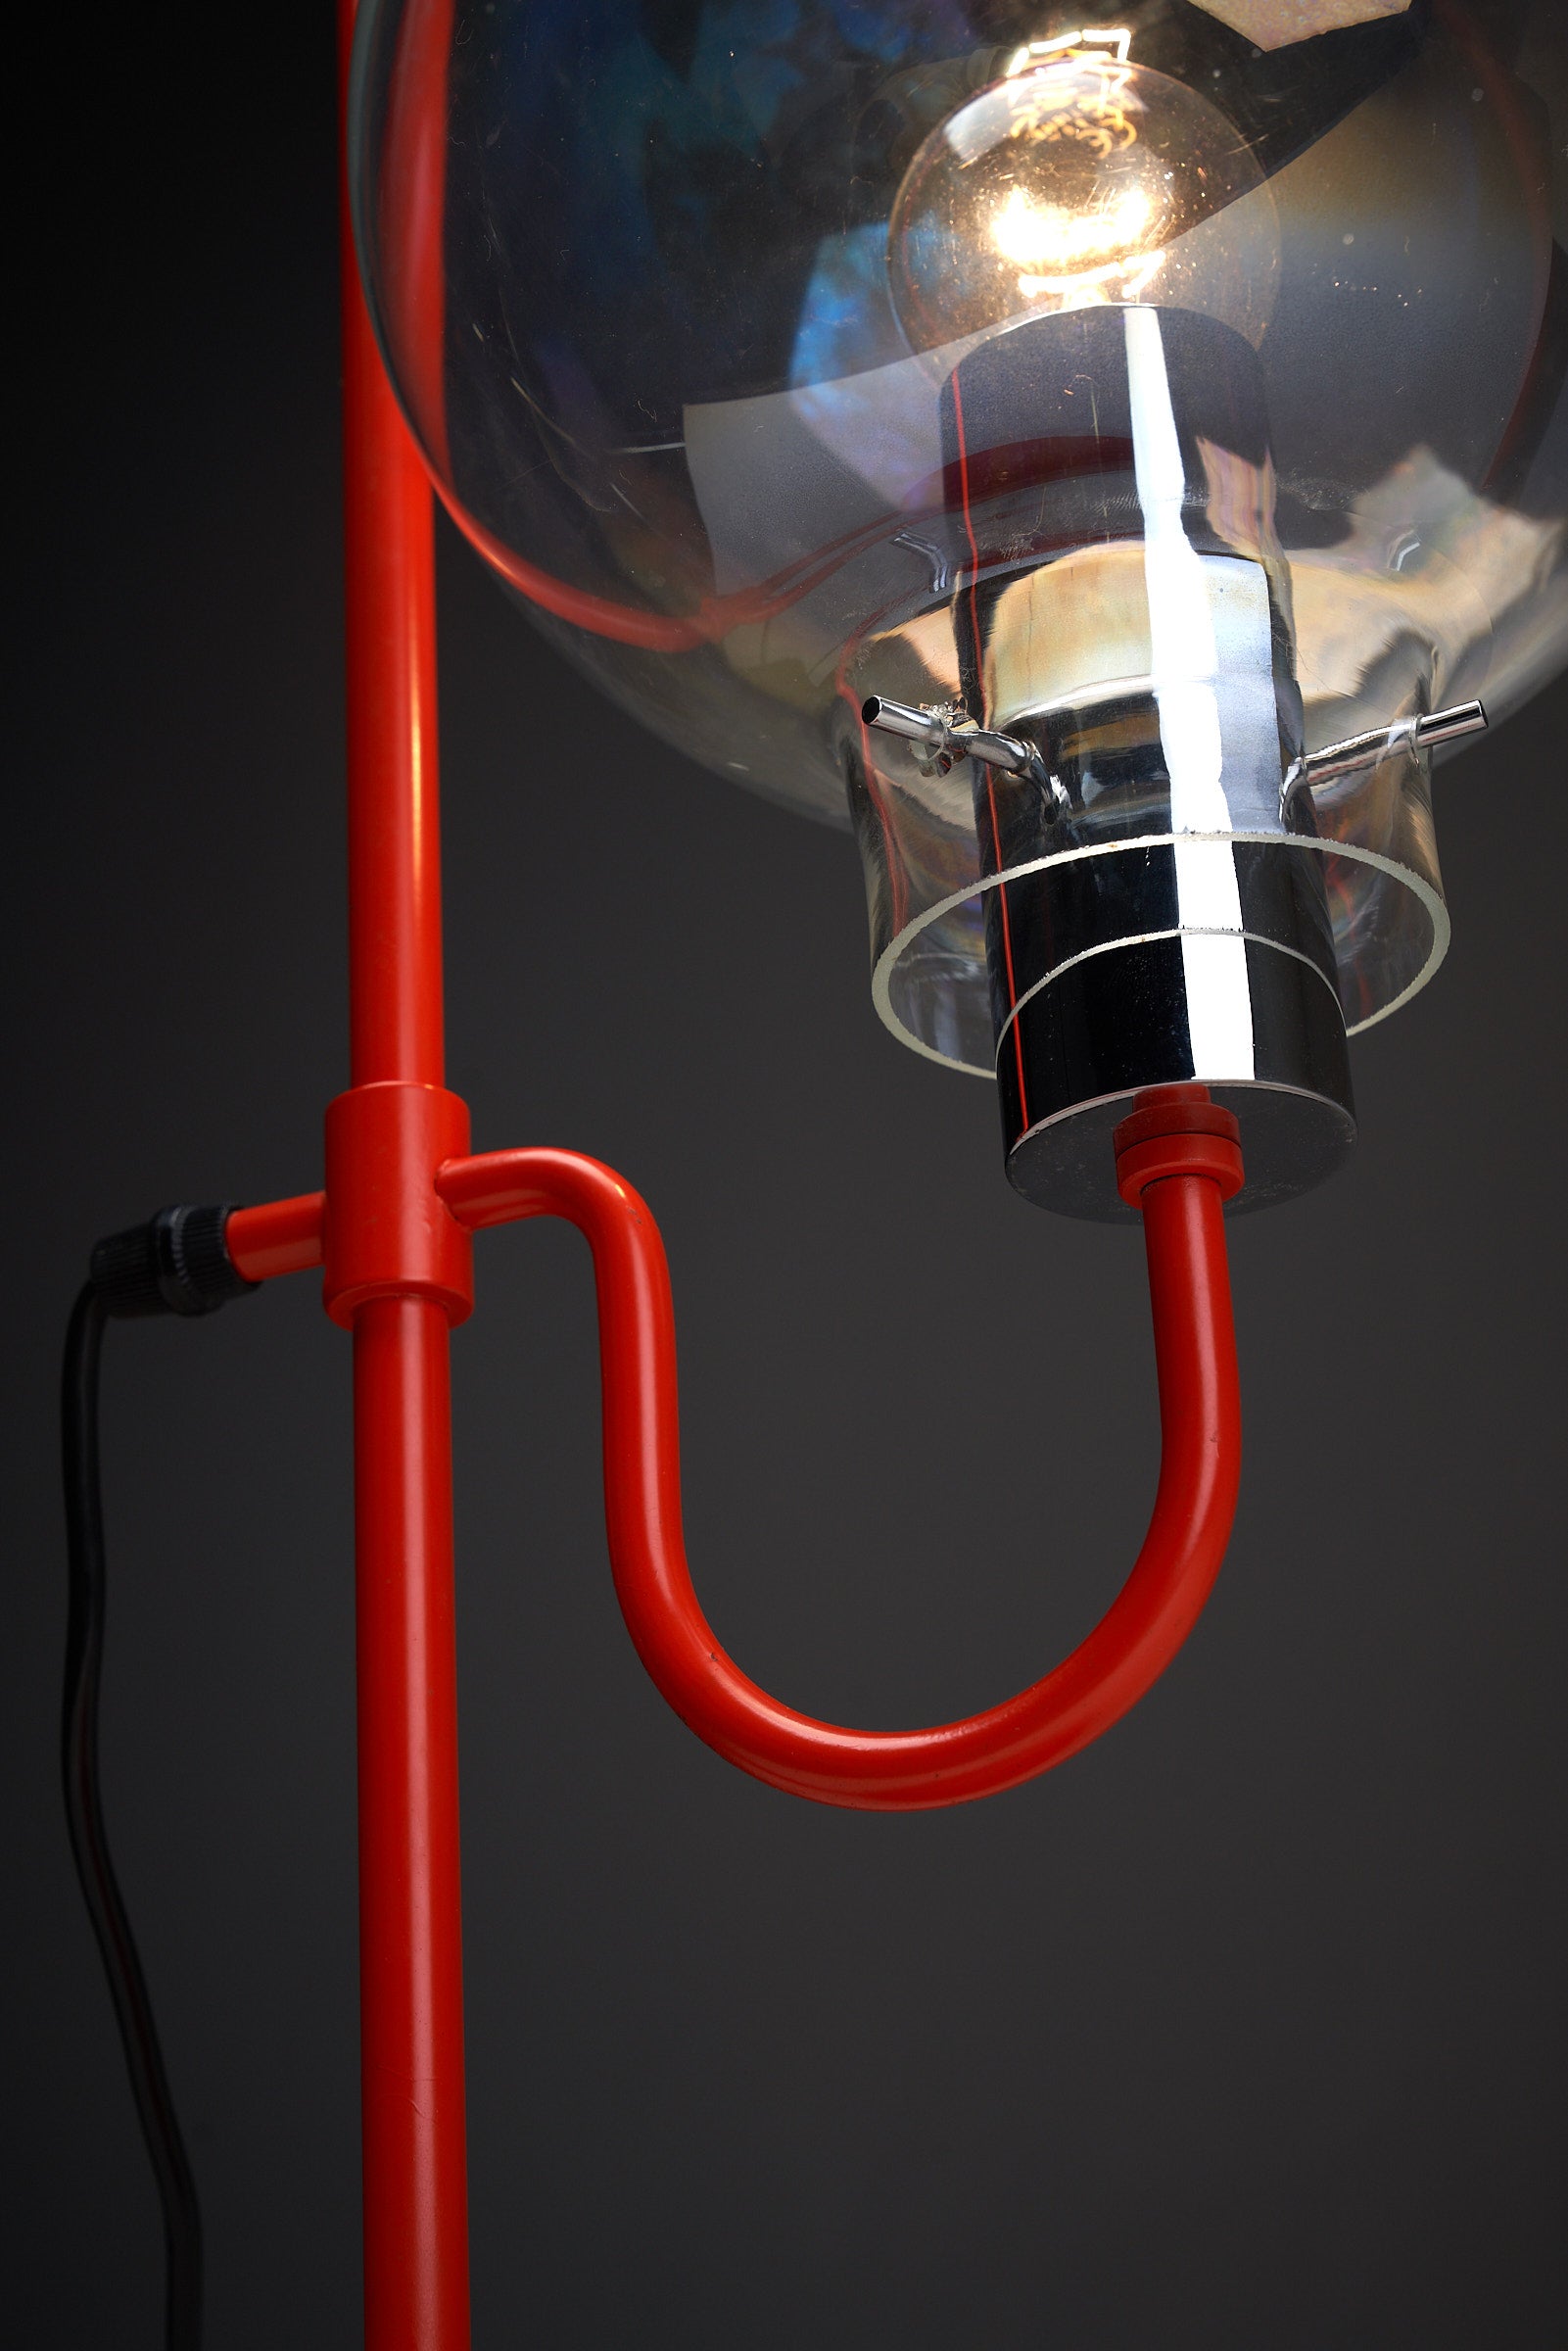 Table Lamp by BAG Turgi, Zwitserland